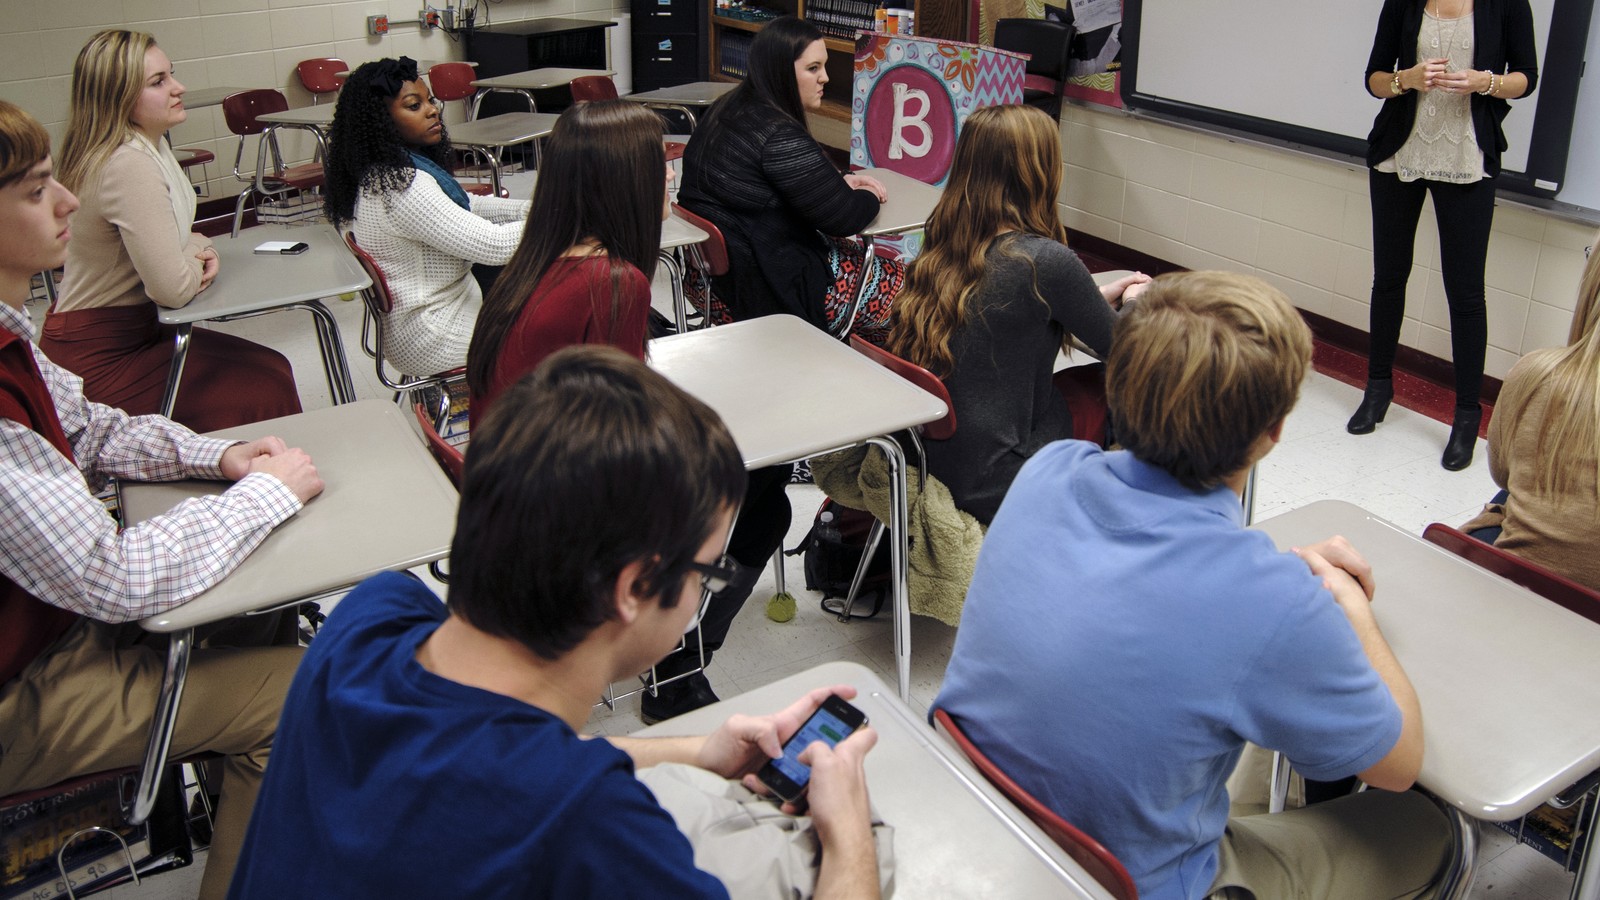 Students can't get off their phones. Schools have had enough.